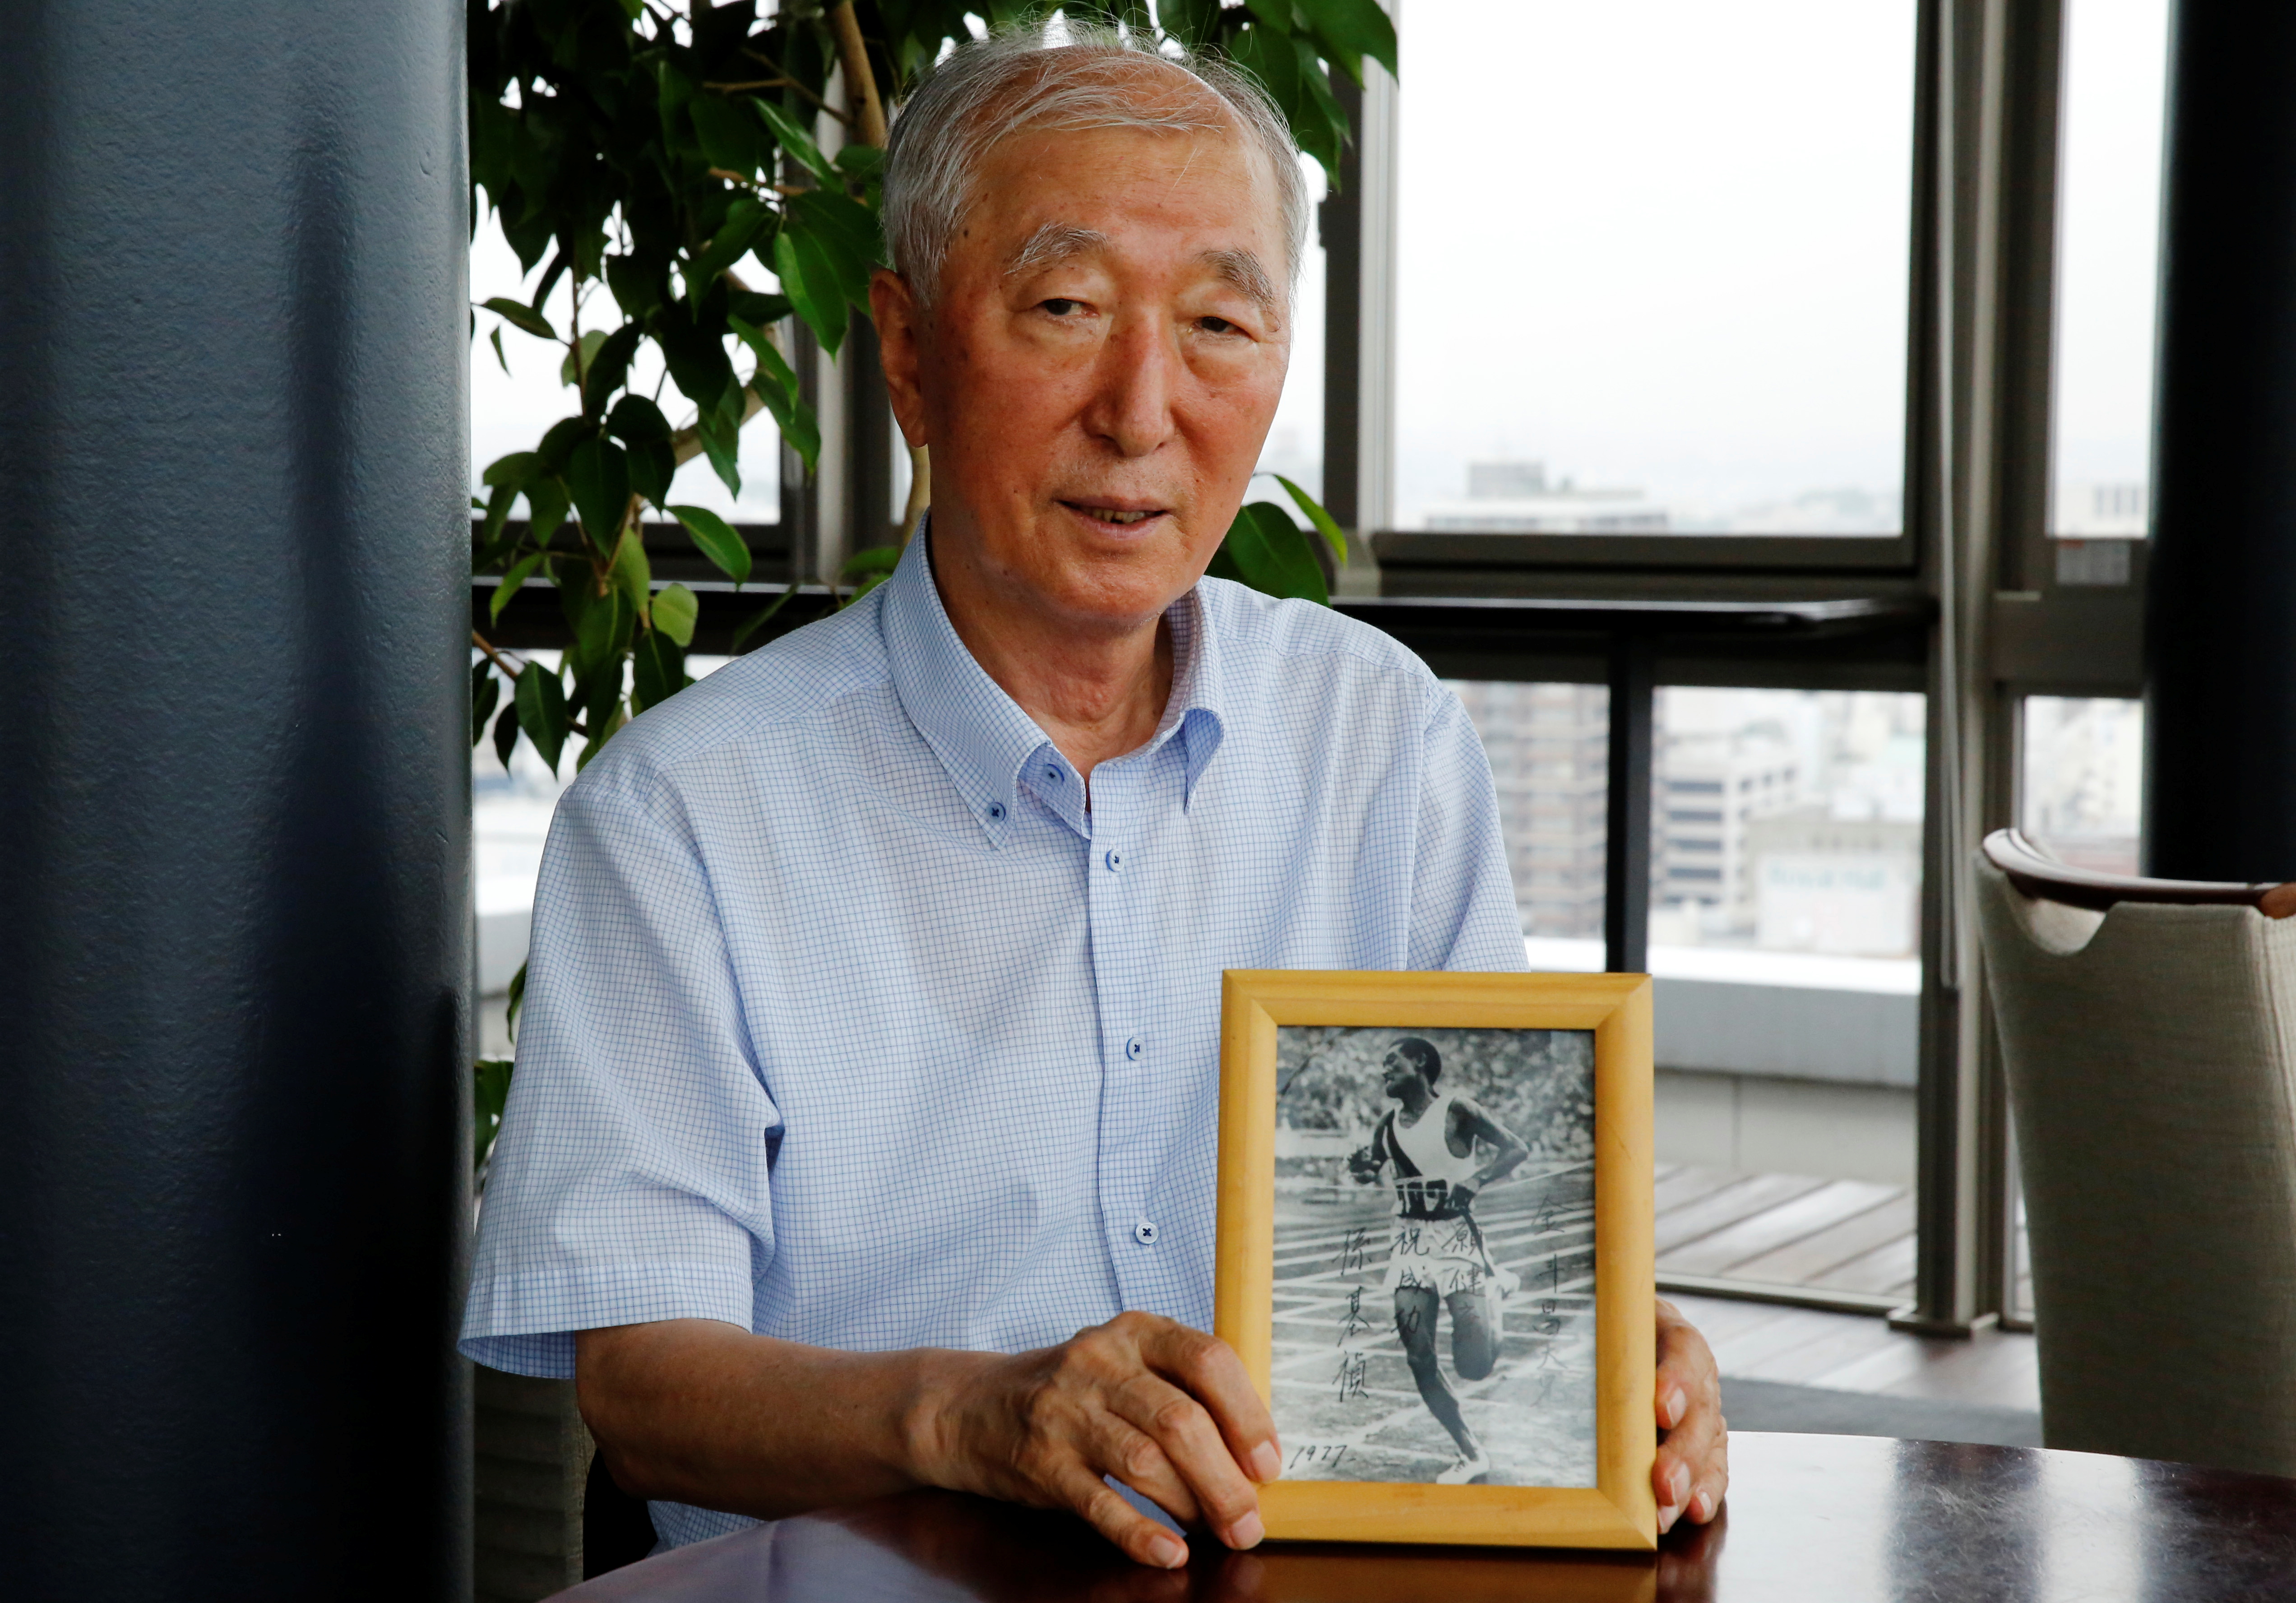 Son Chung-in poses with a photograph of his father, Sohn Kee-chung, who won the 1936 Berlin Olympics marathon event, during an interview with Reuters in Yokohama